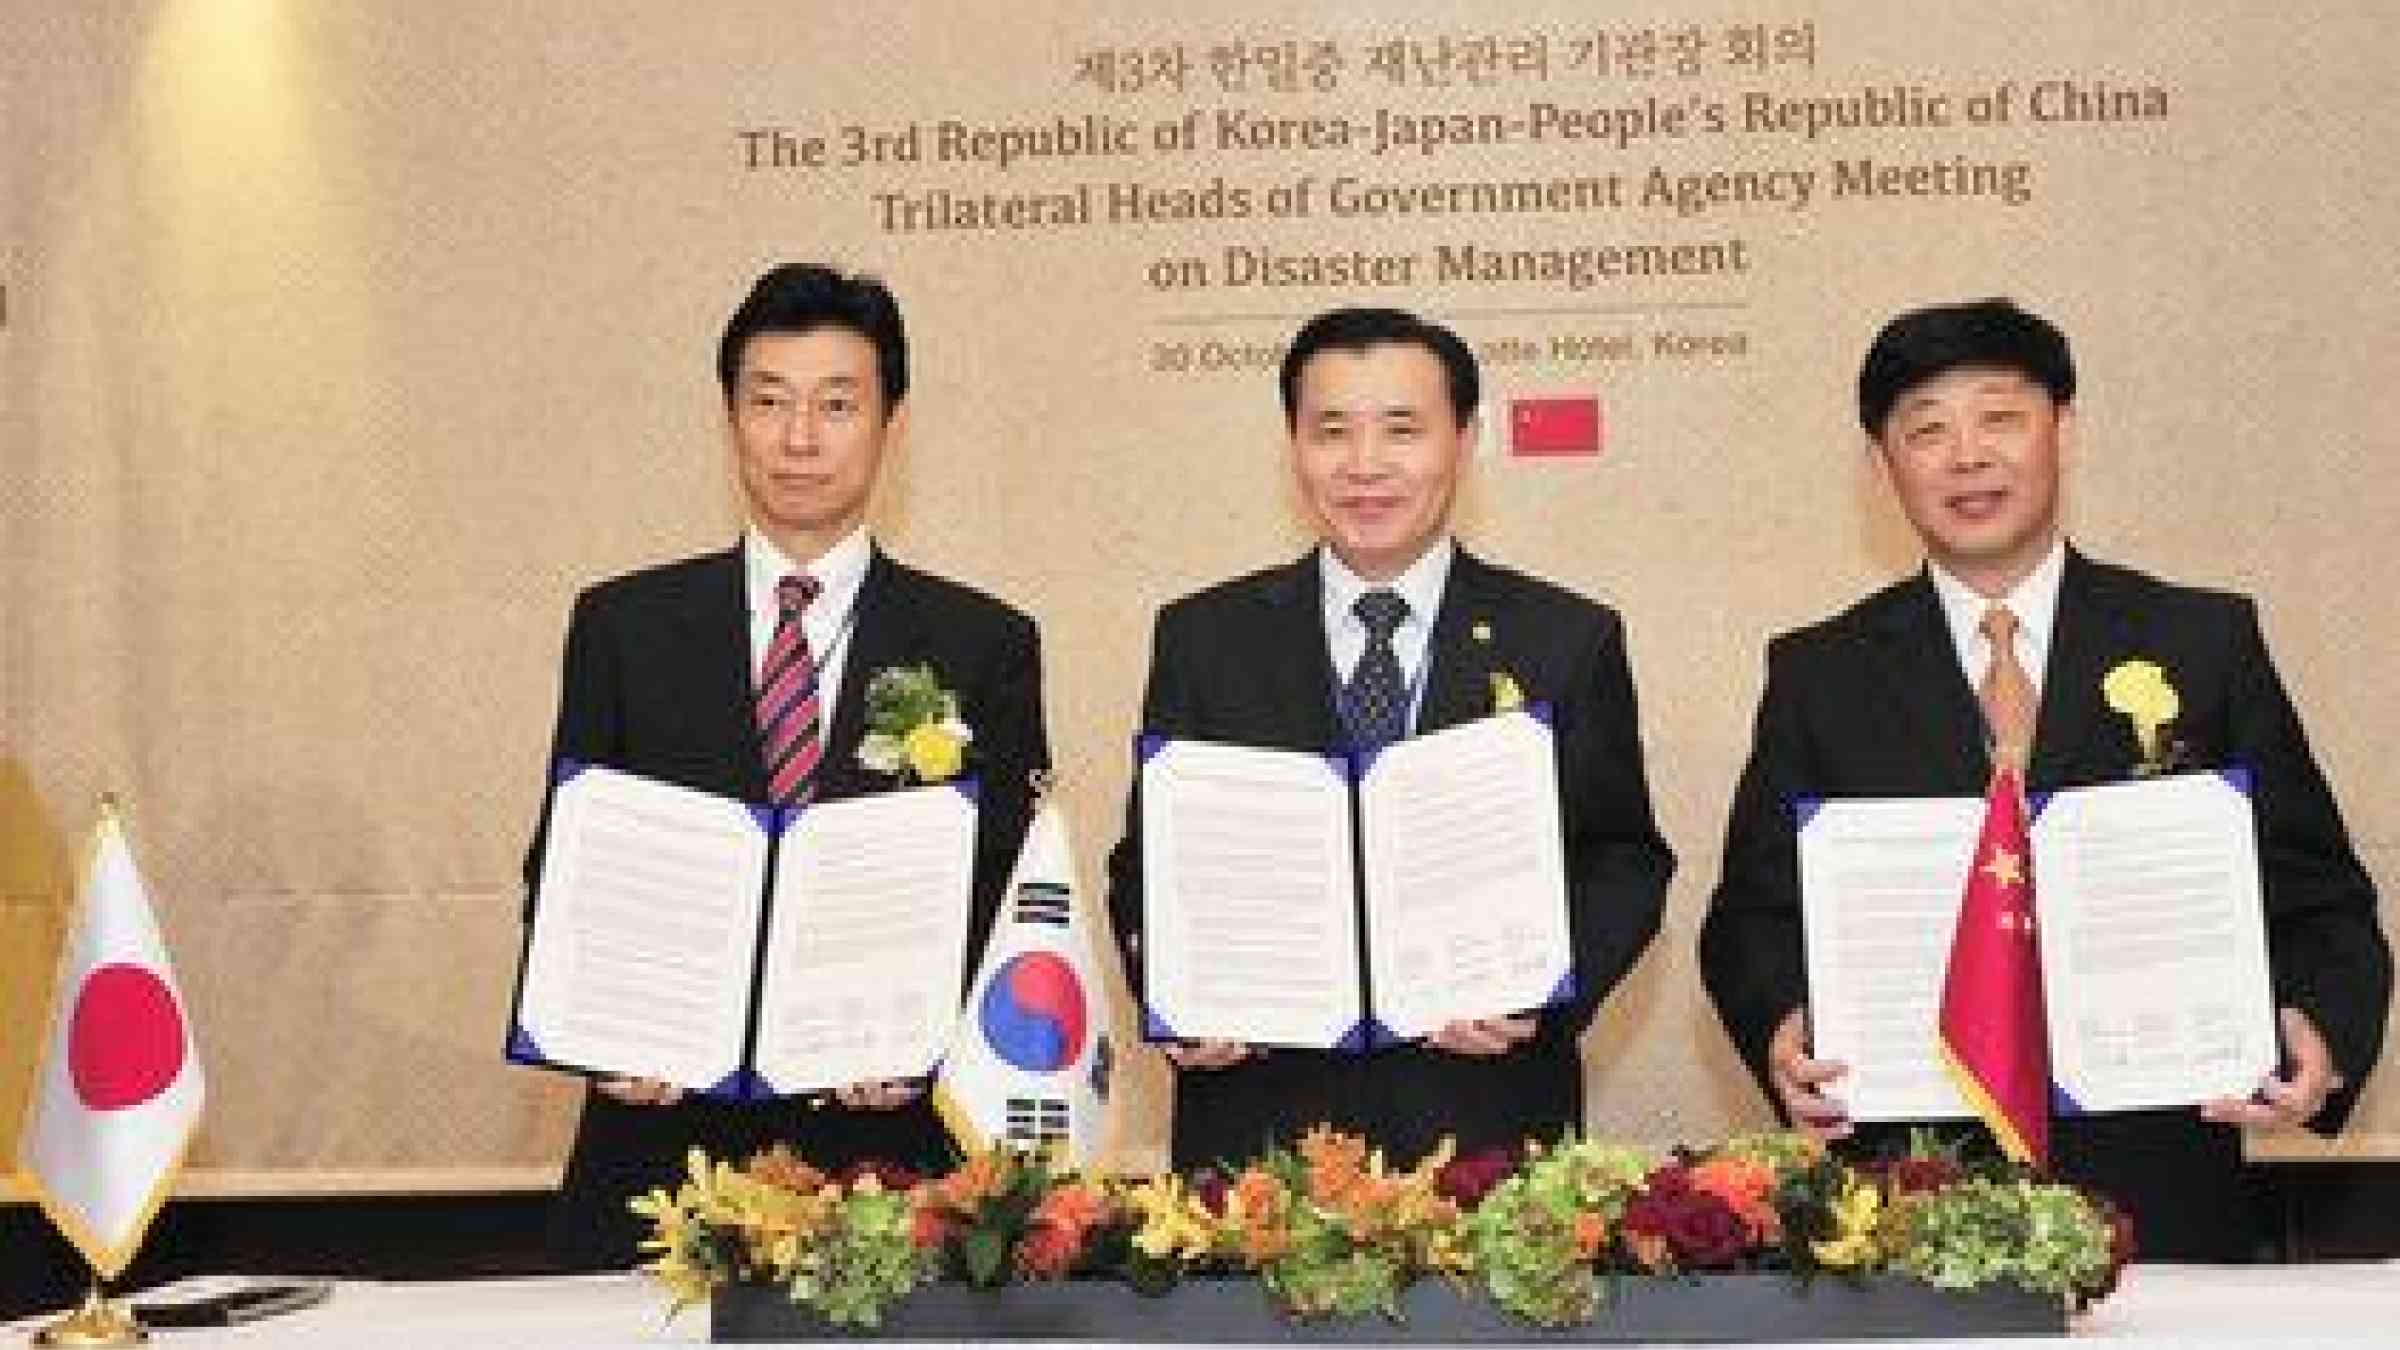 <b>Joint Declaration: </b>Japan, Republic of Korea, and China agreed to strengthen their disaster management partnership.